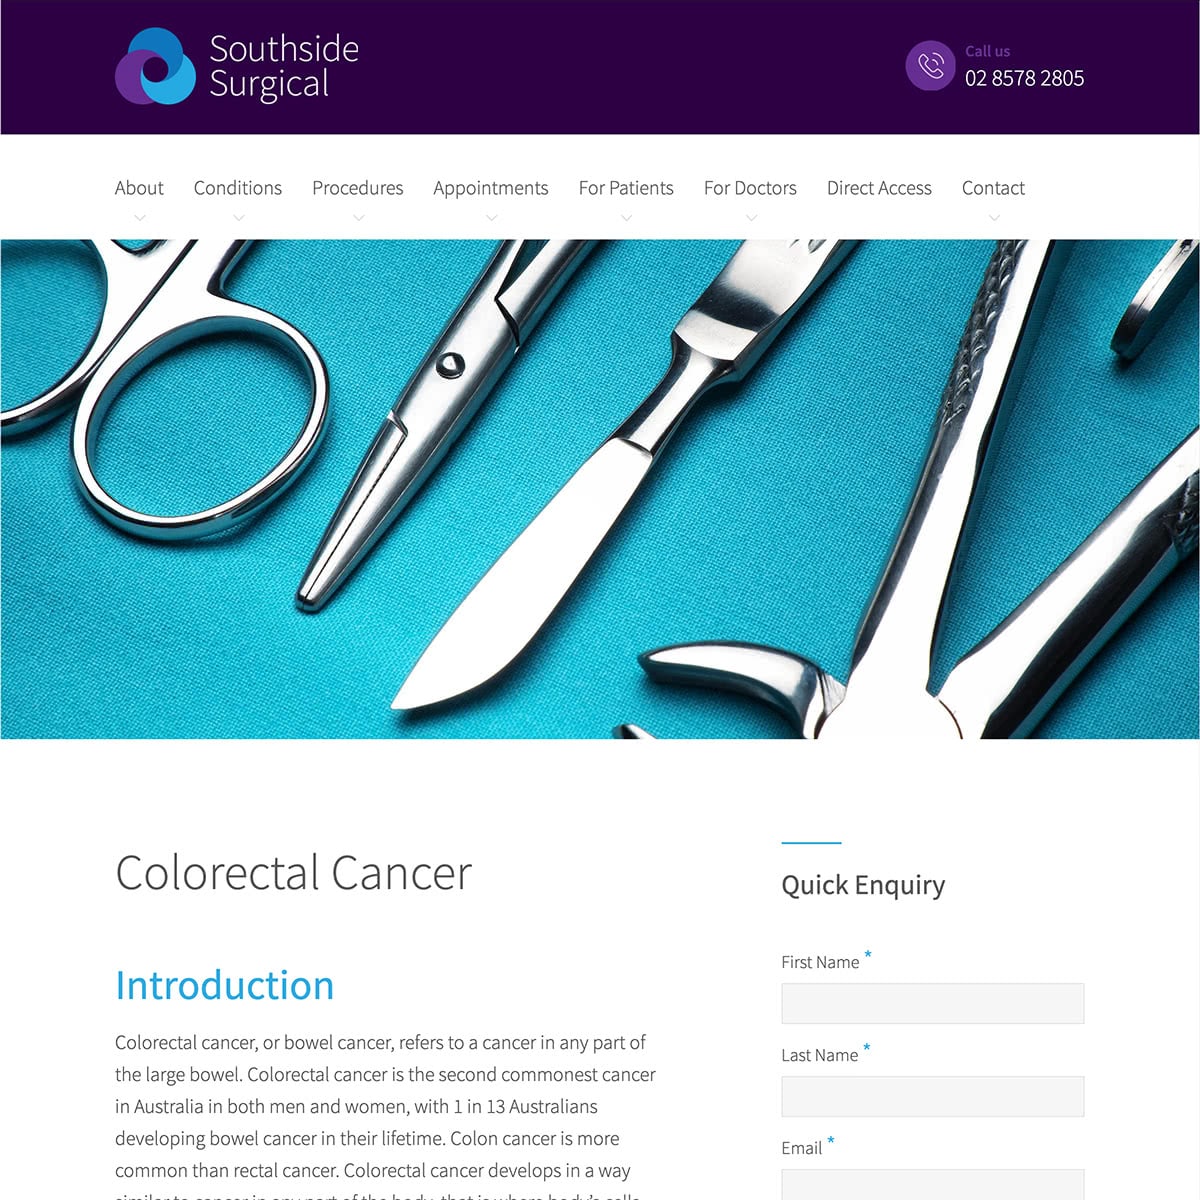 Southside Surgical - Conditions Page